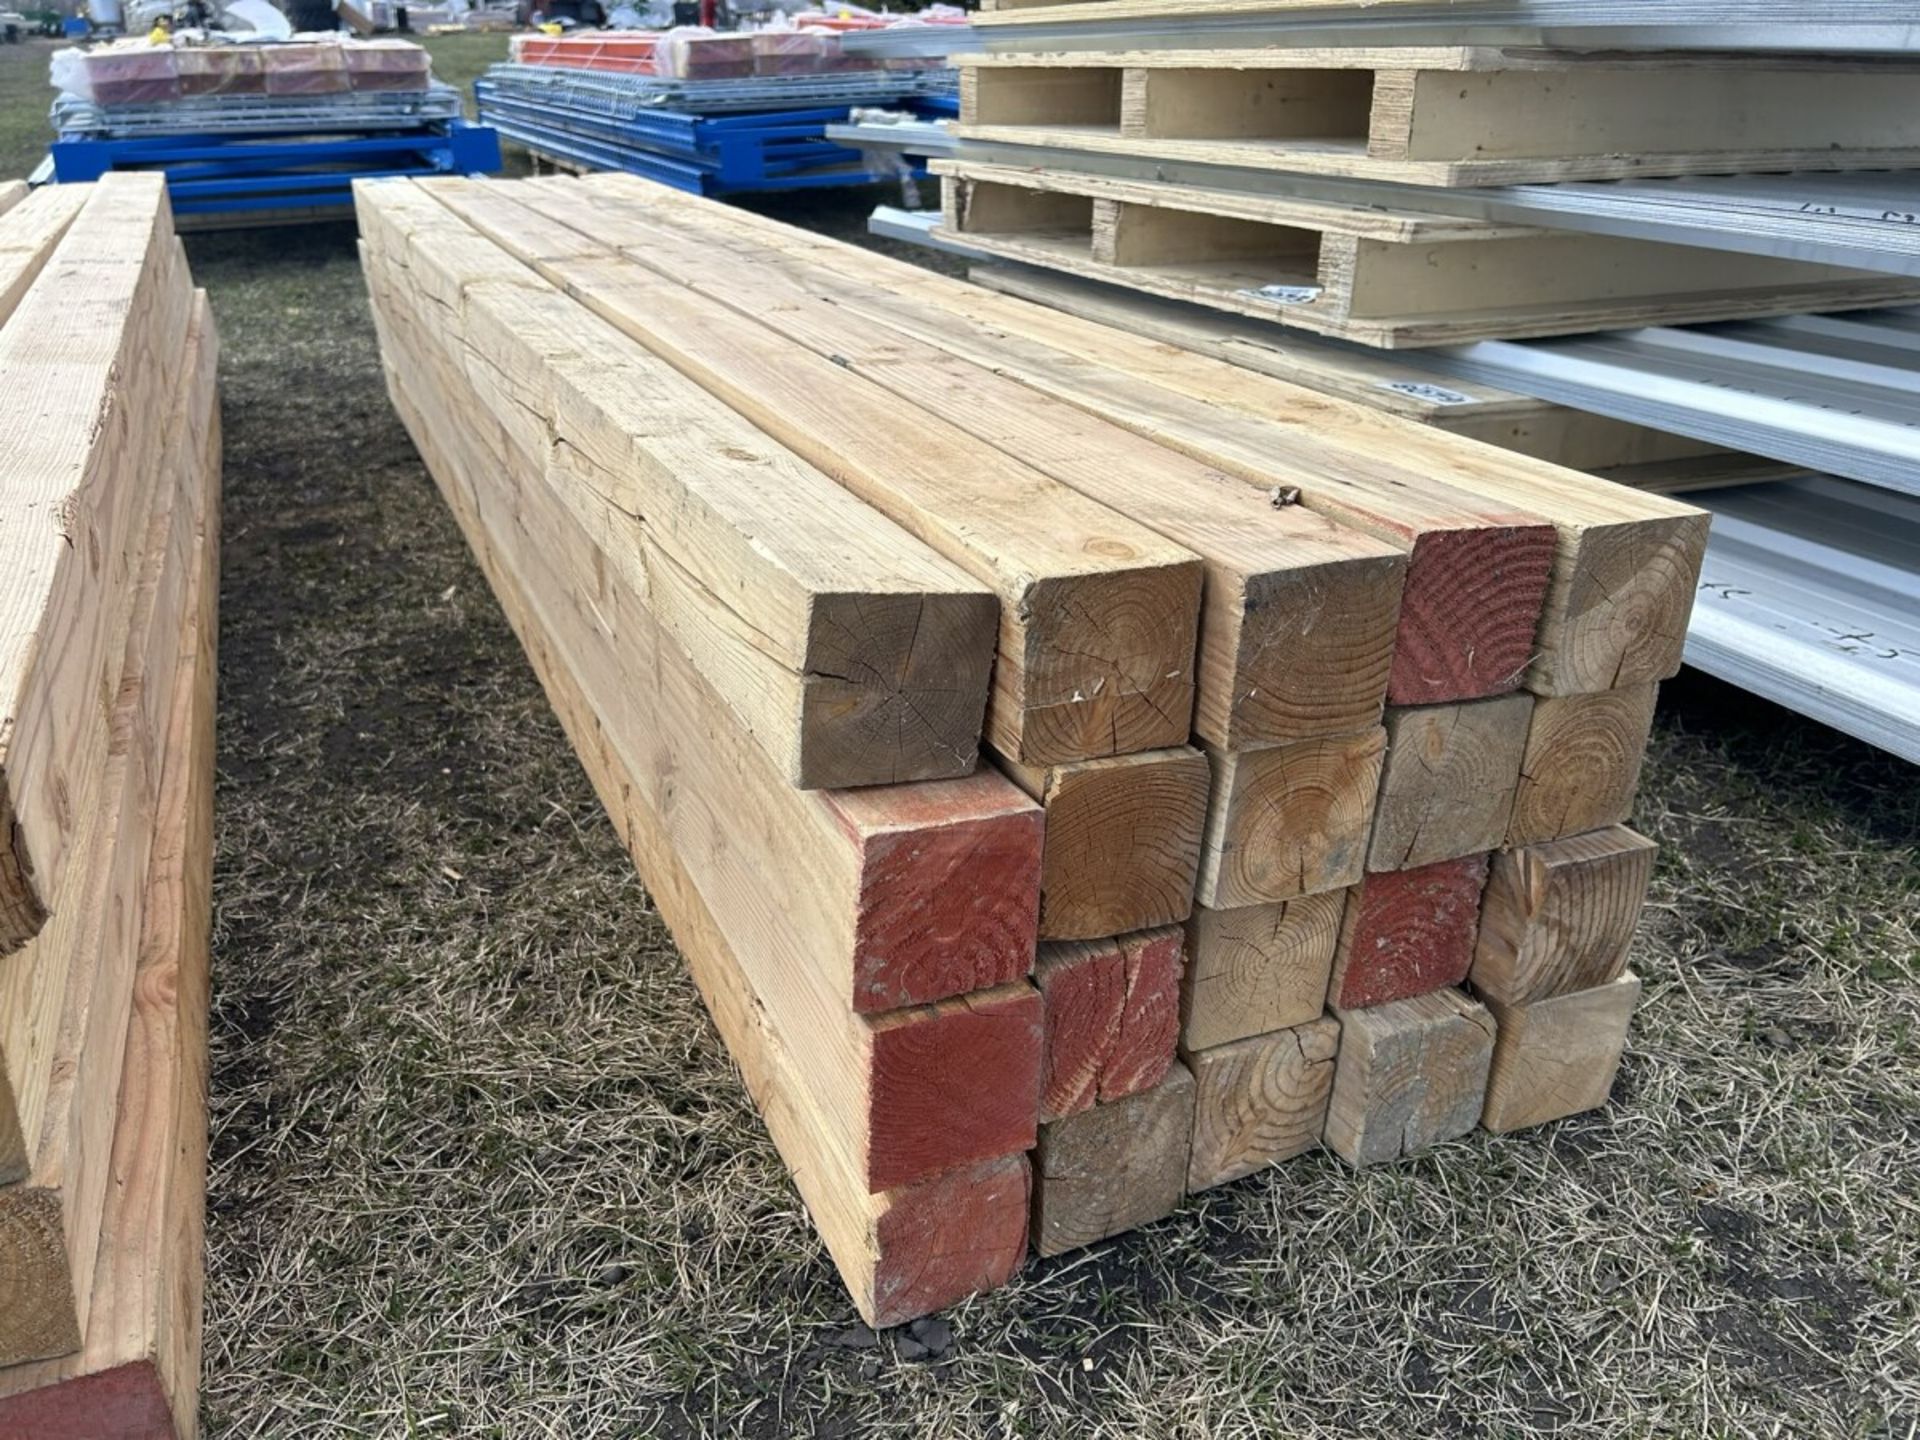 L/O - 20 - 4"x4"x7.5' TIMBERS - SPRUCE - Image 4 of 4